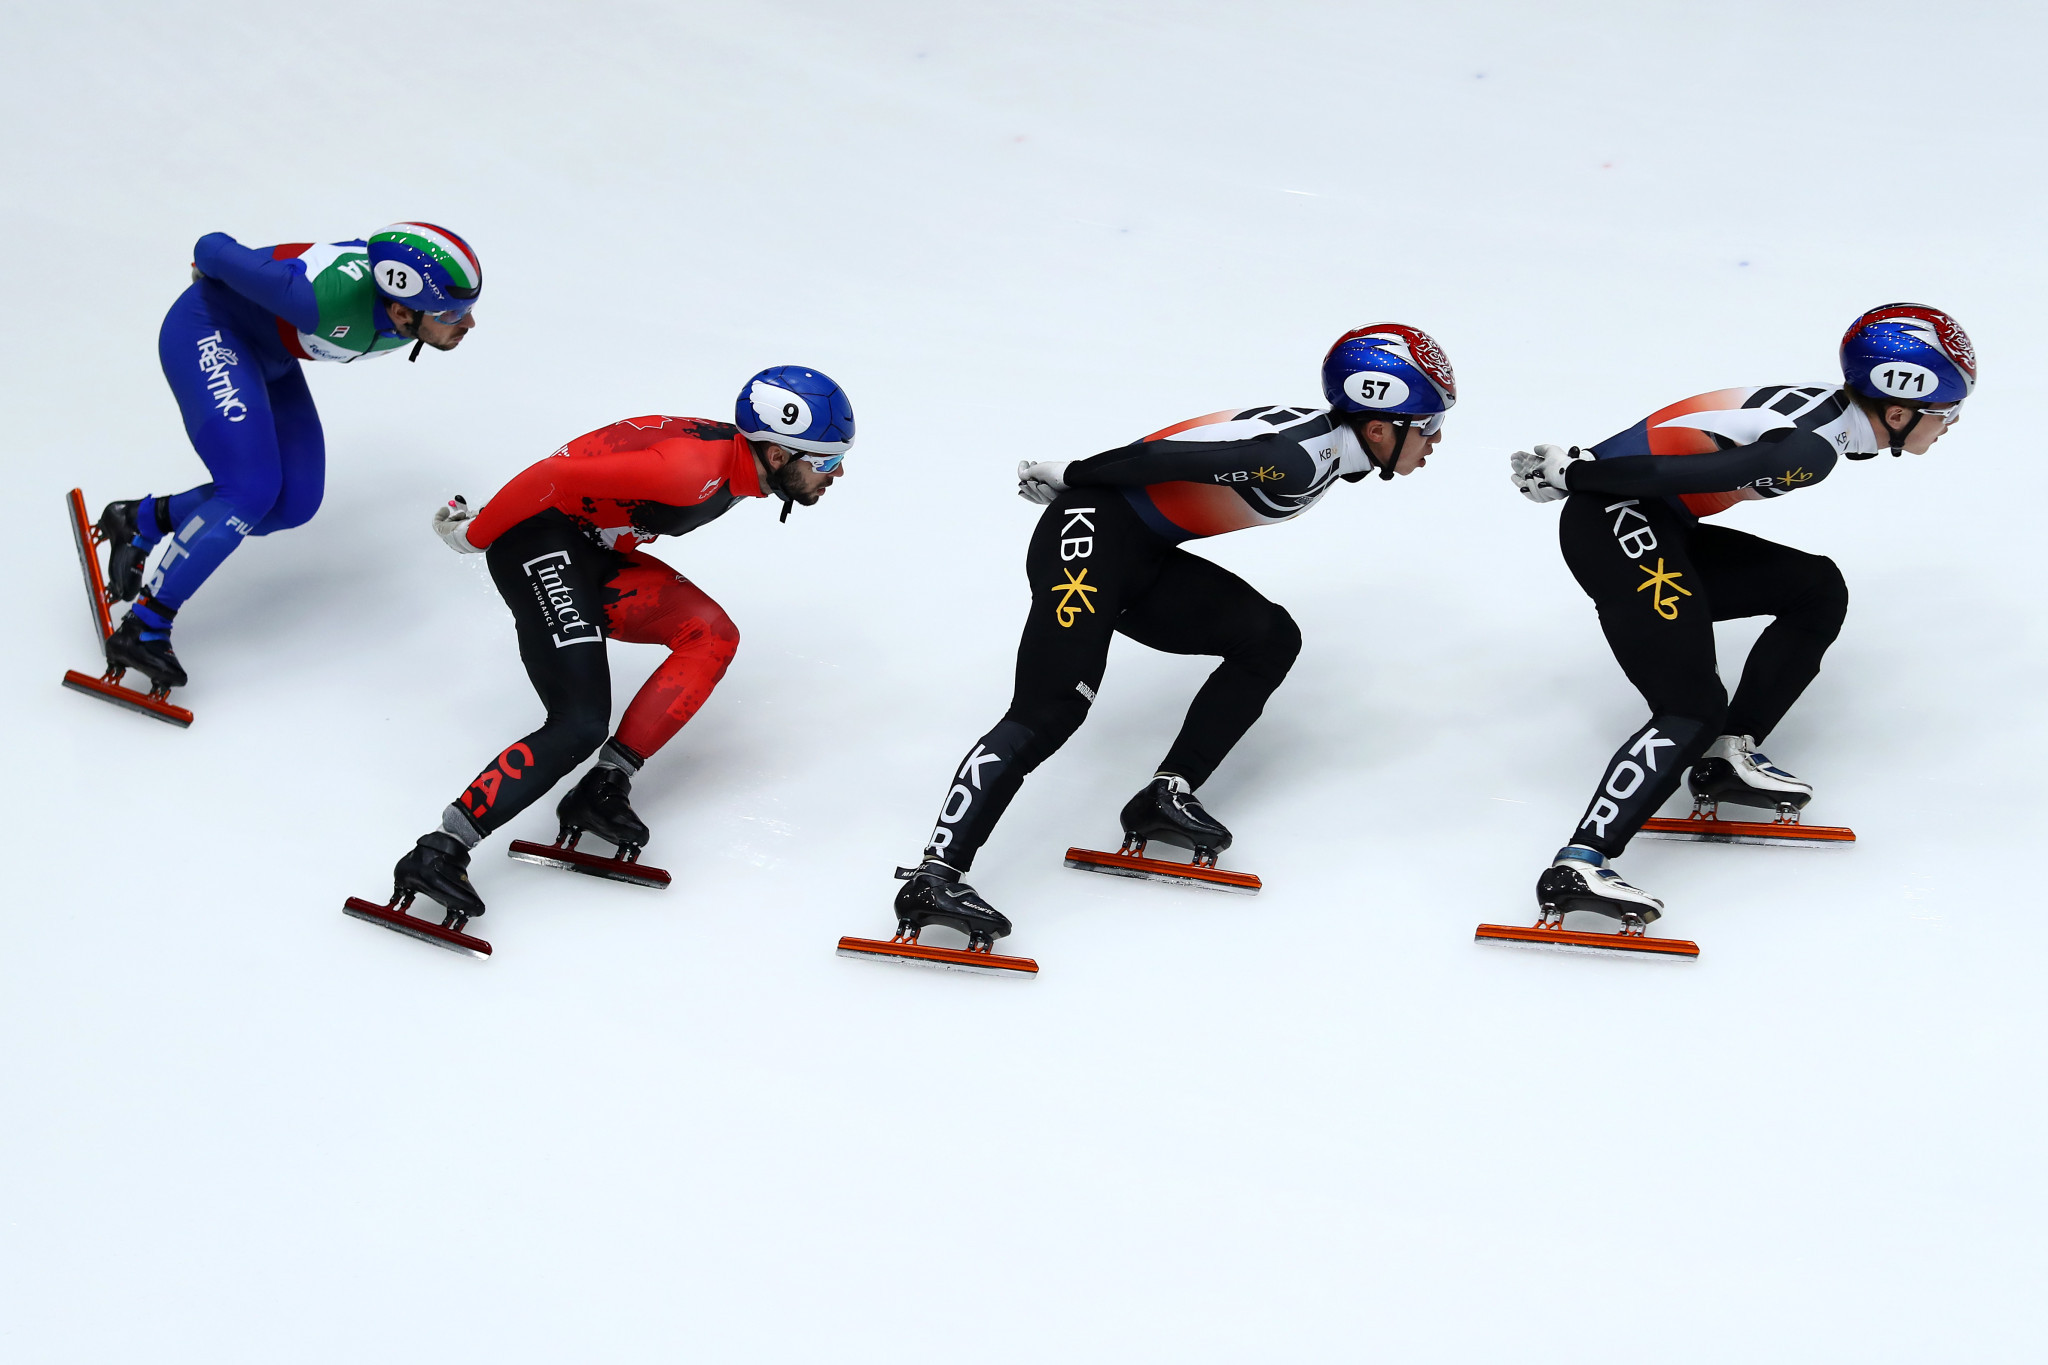 ISU confirms speed skating format for Beijing 2022 test event